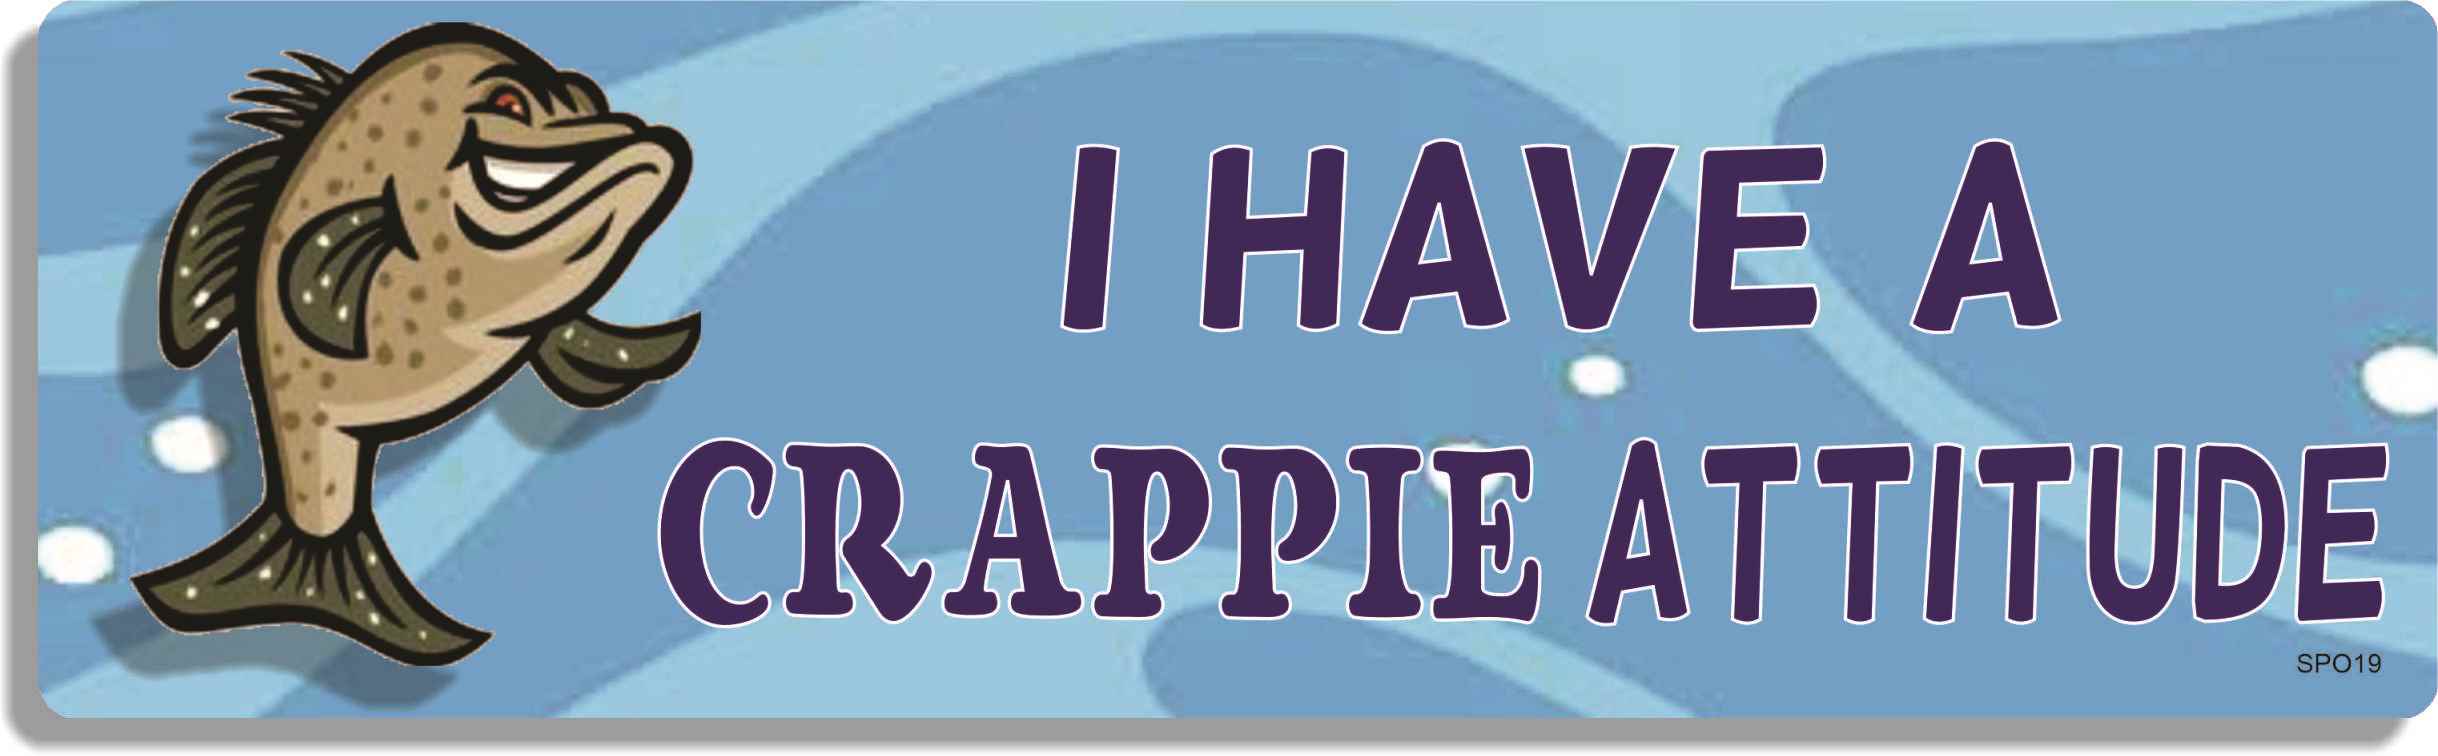 Have a Crappie Day Sticker 2